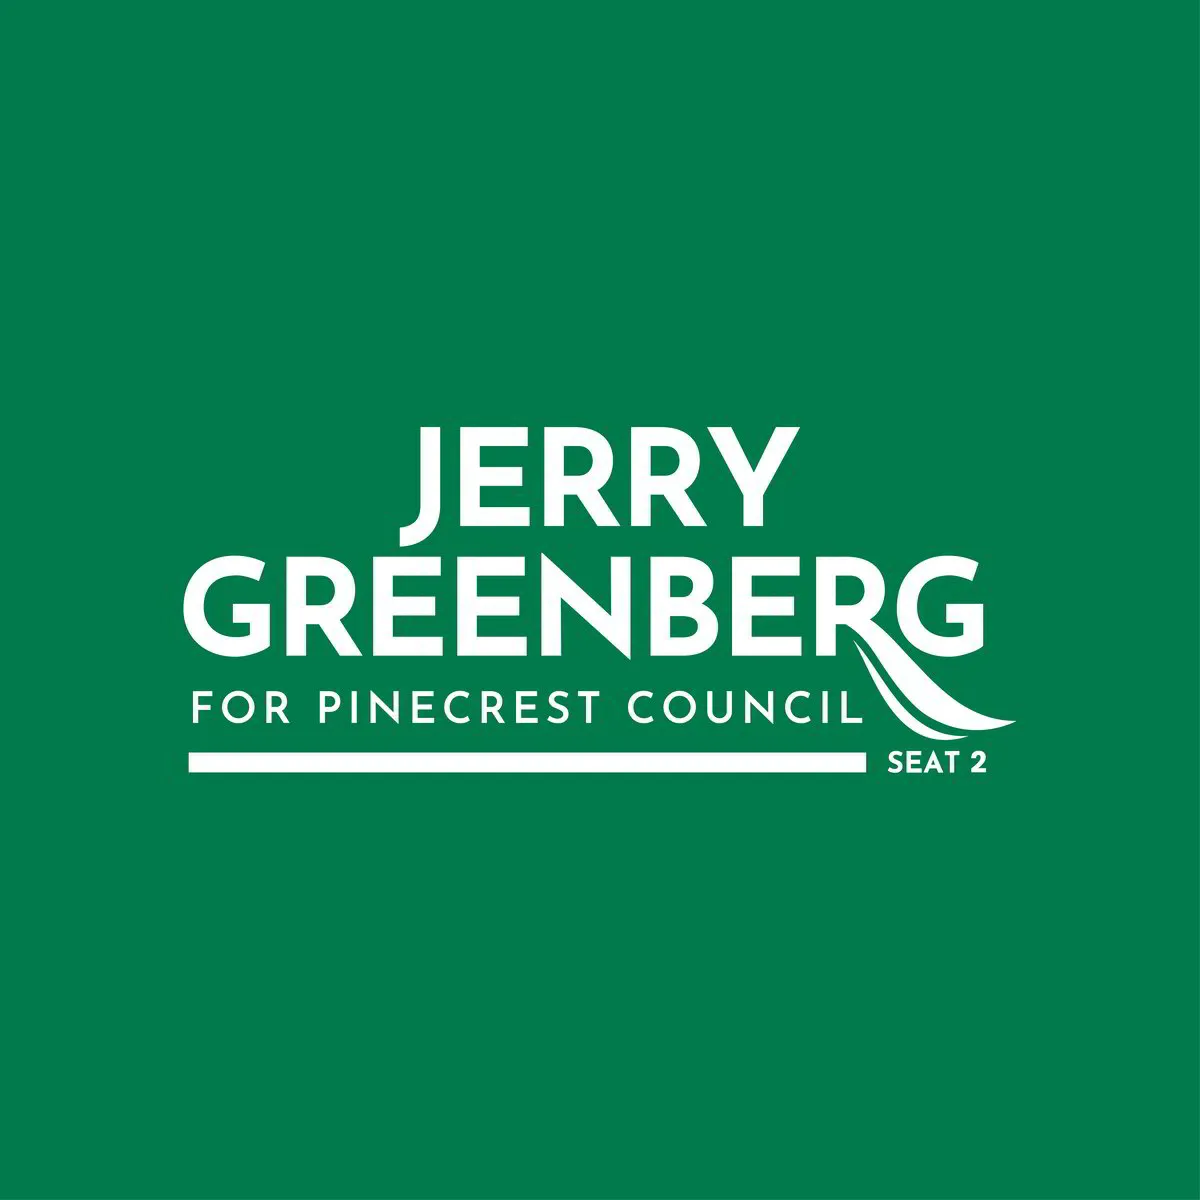 Jerry Greenberg for Pinecrest Council